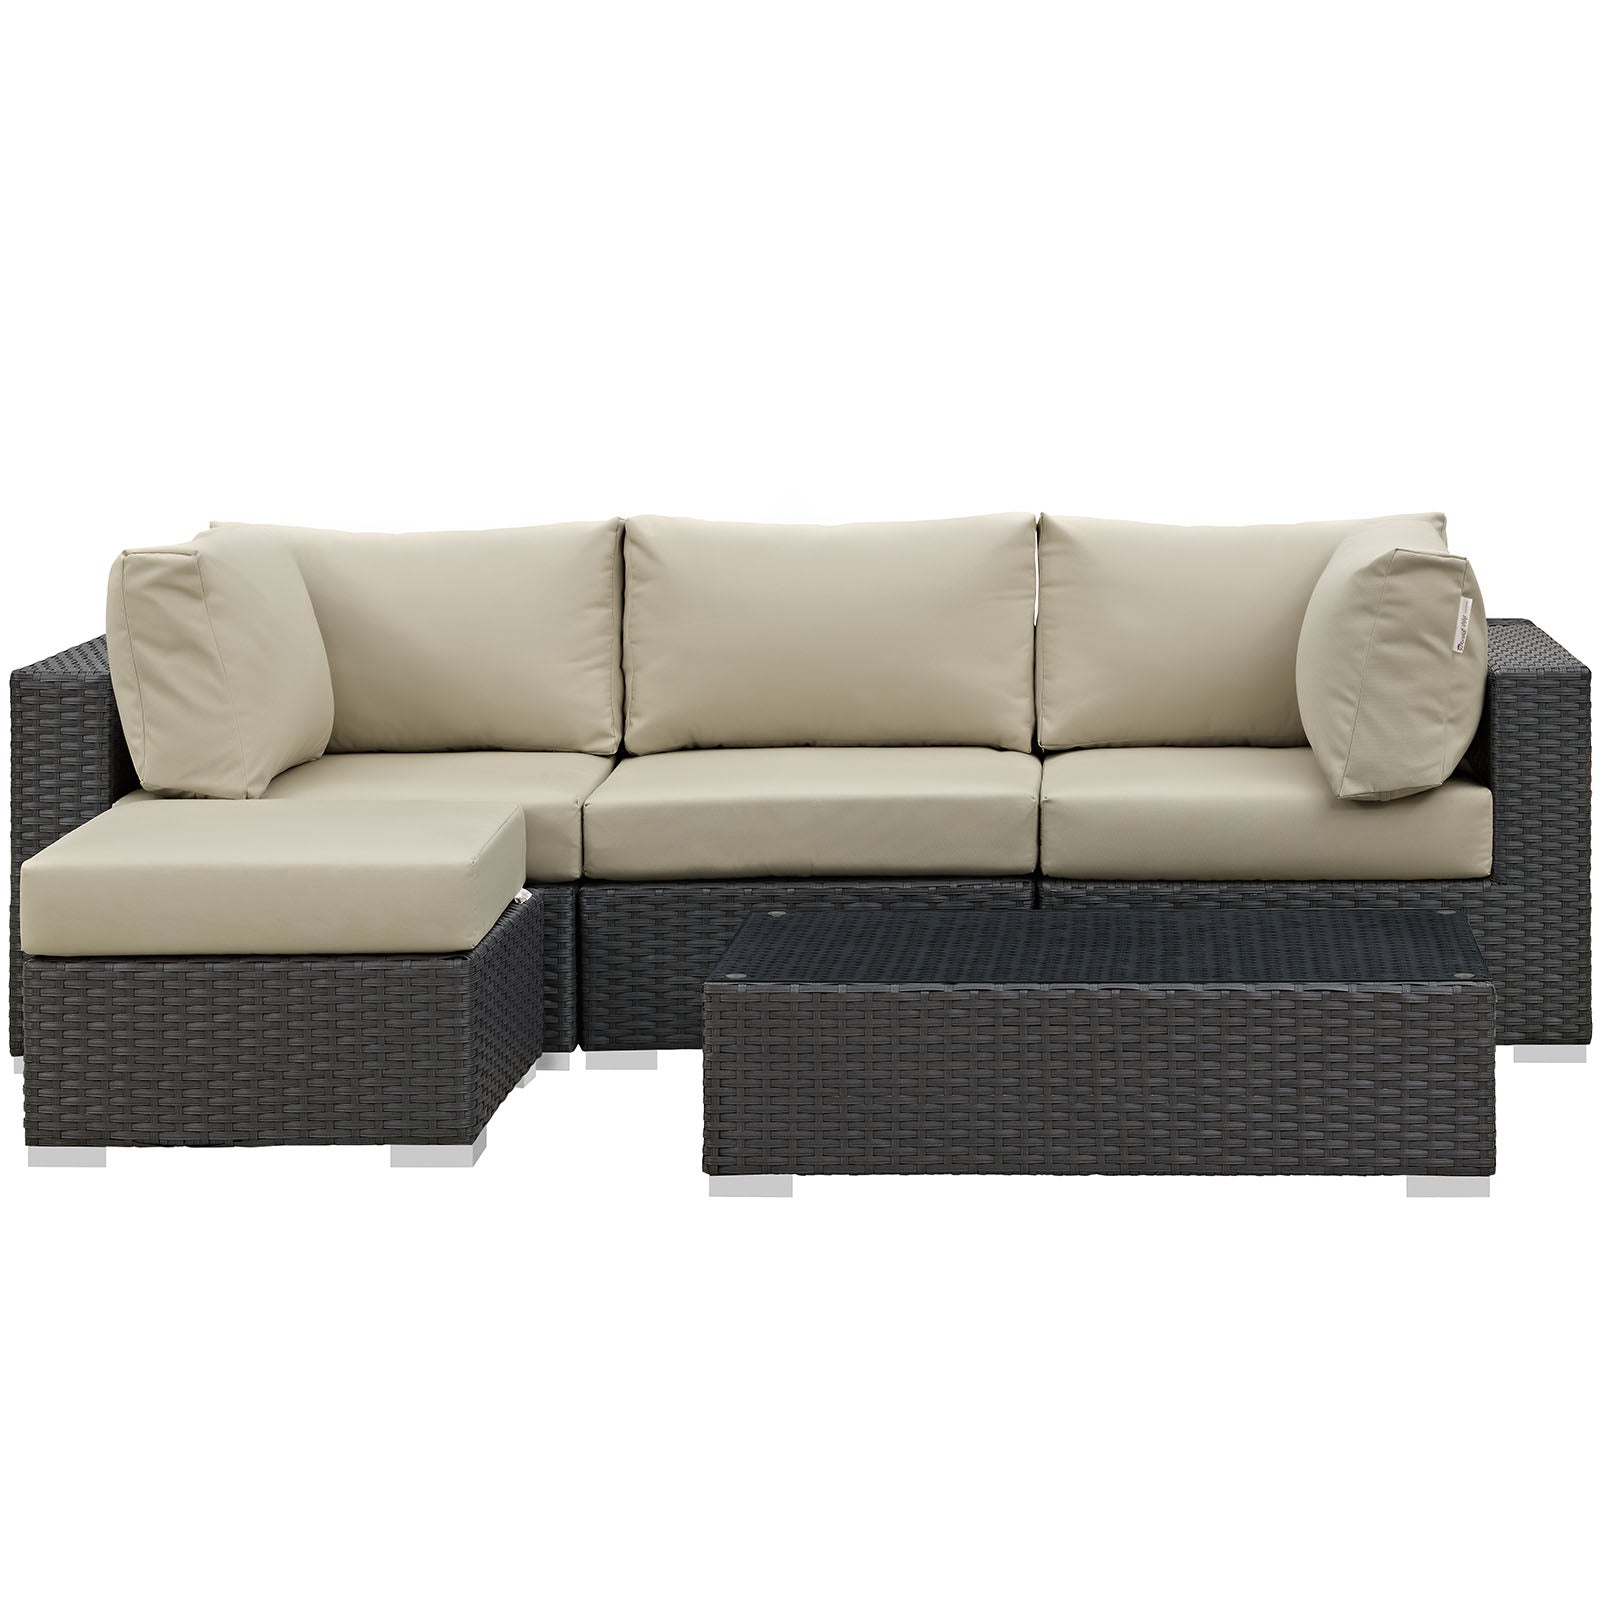 Sojourn 5 Piece Outdoor Patio Sunbrella Sectional Set With Ottoman